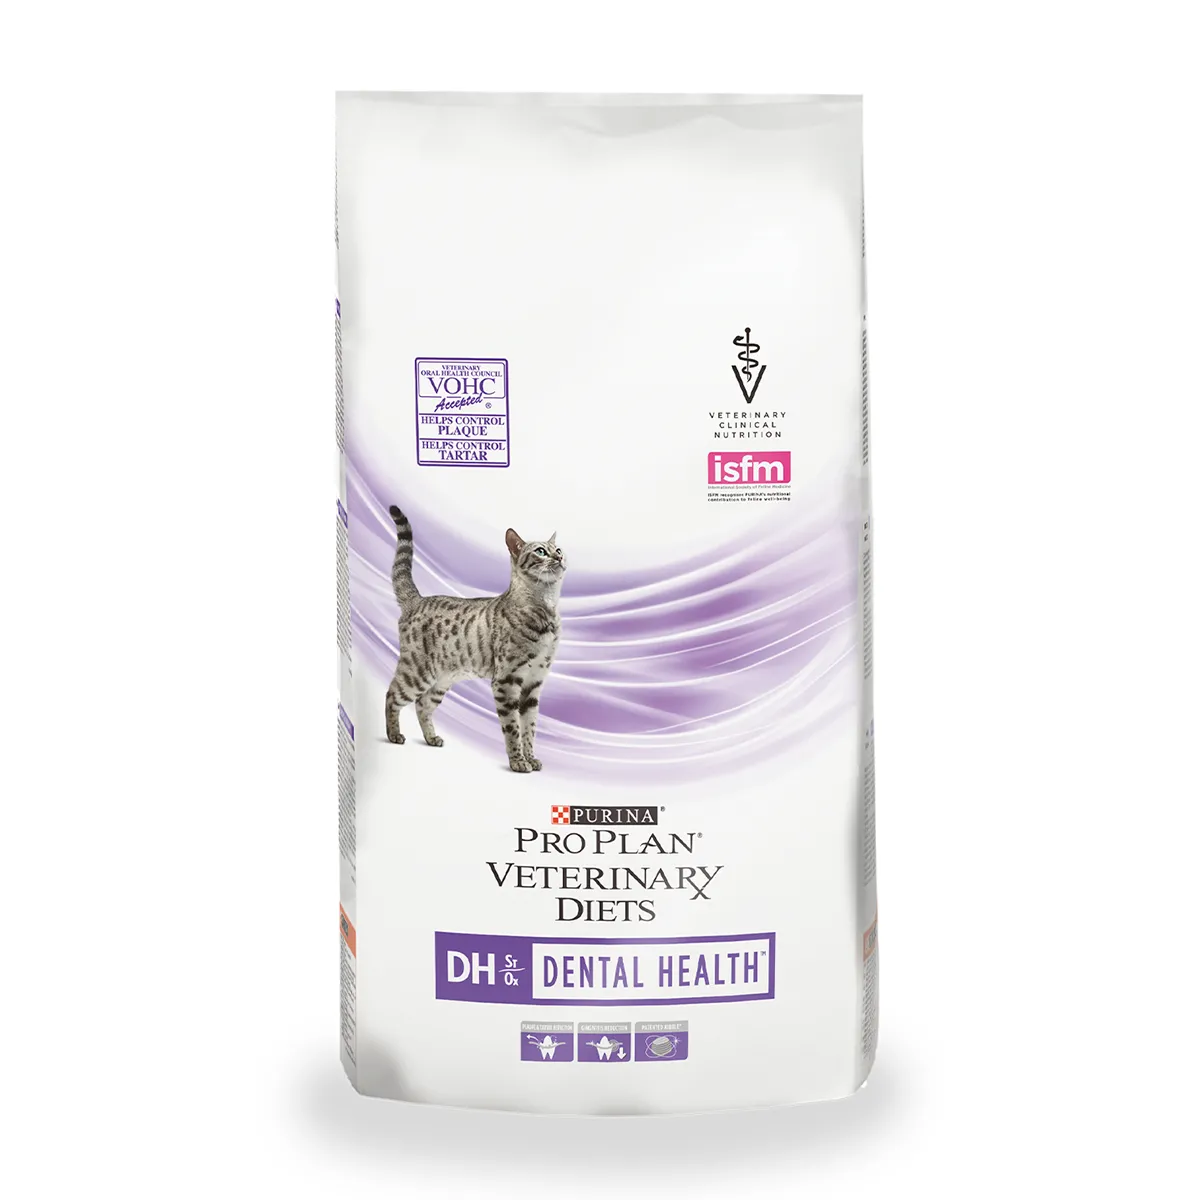 ProPlan-Veterinary-Diets-DH-Dental-Health-Gato-Front